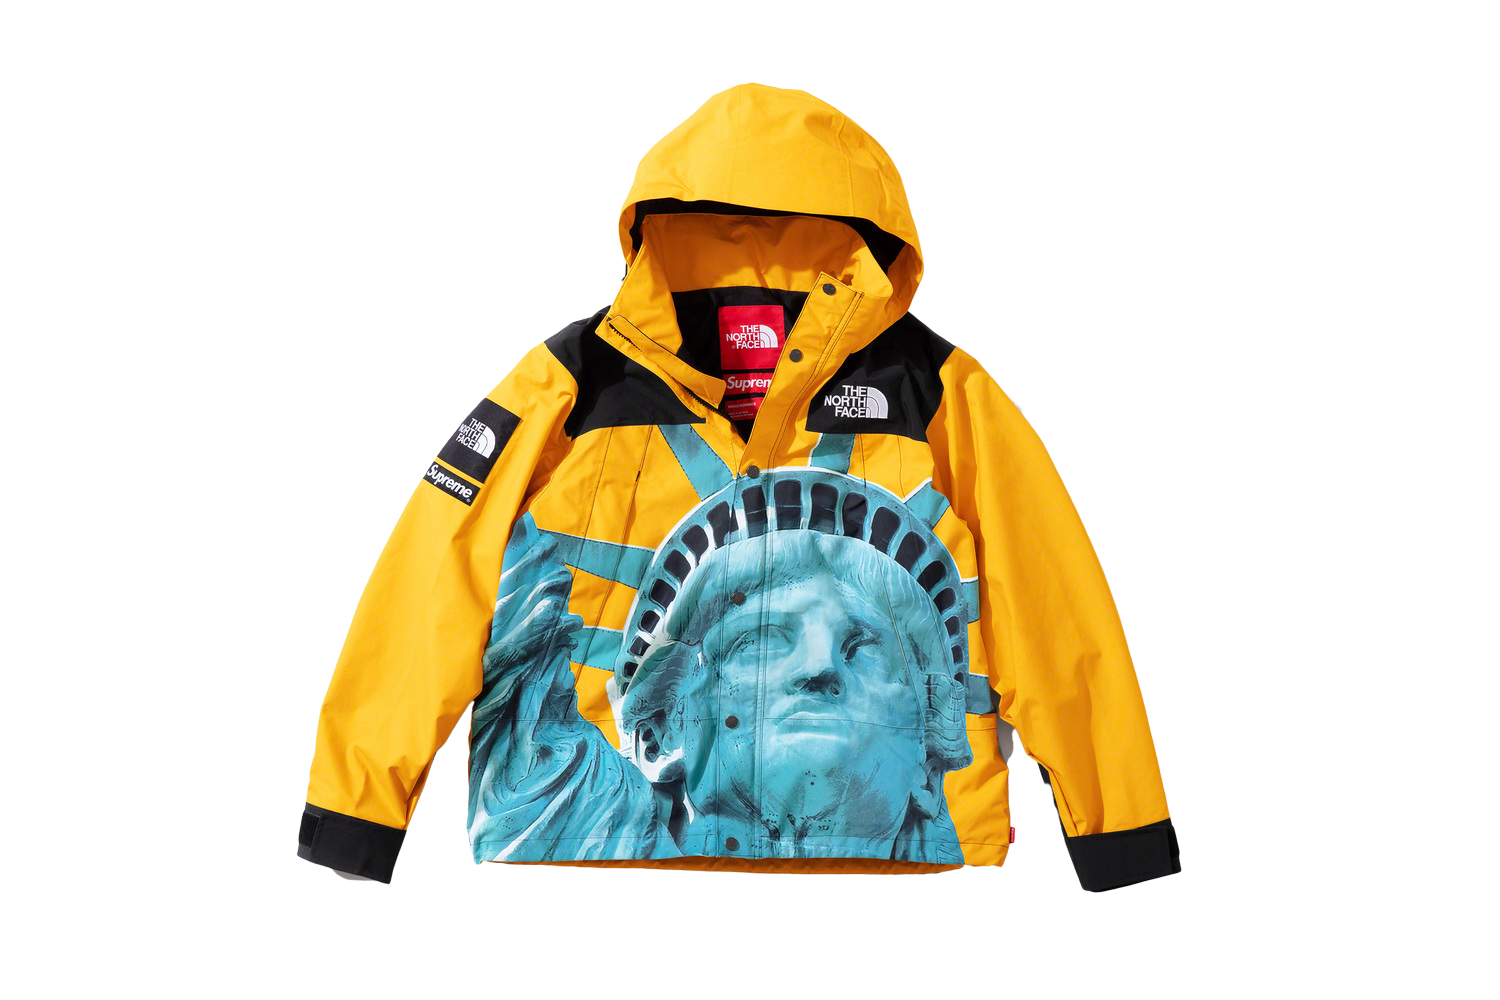 The North Face Statue of Liberty Mountain Jacket - fall winter 2019 -  Supreme